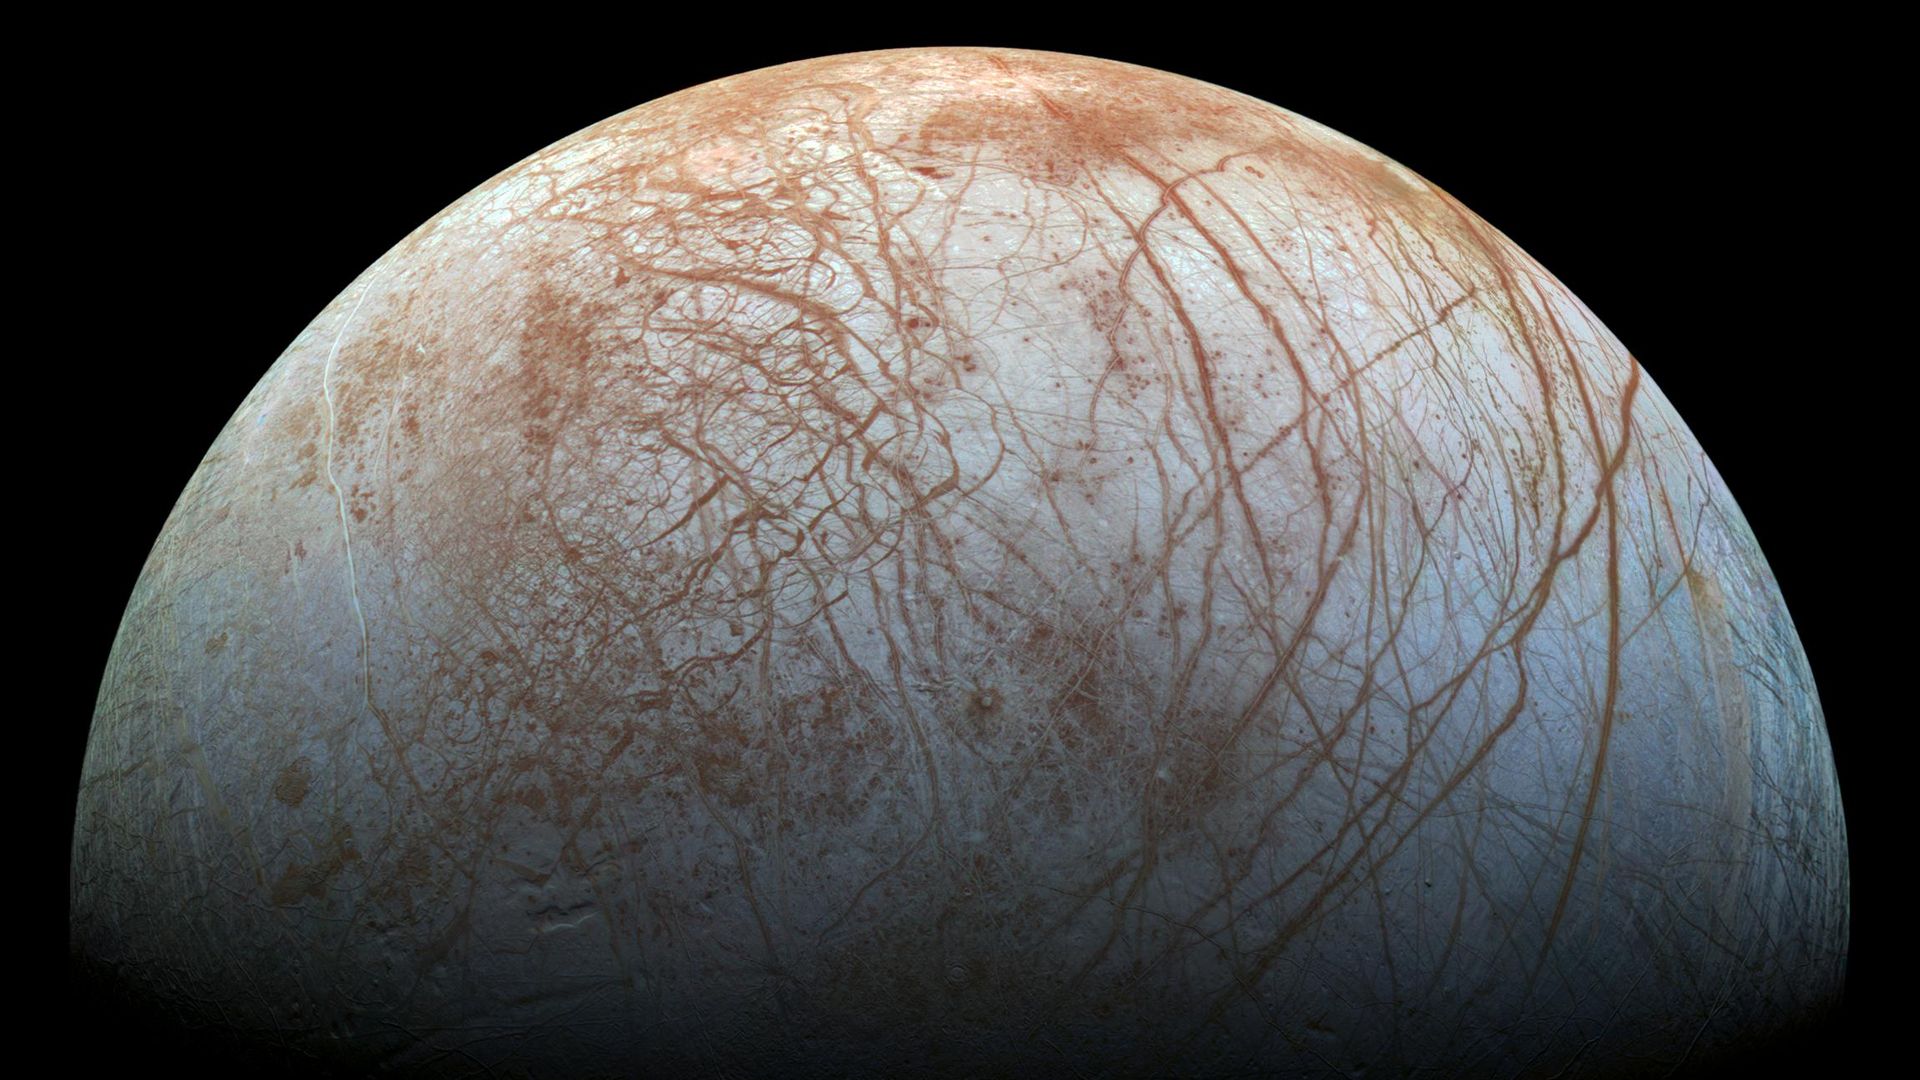 Europa seen against the blackness of space.